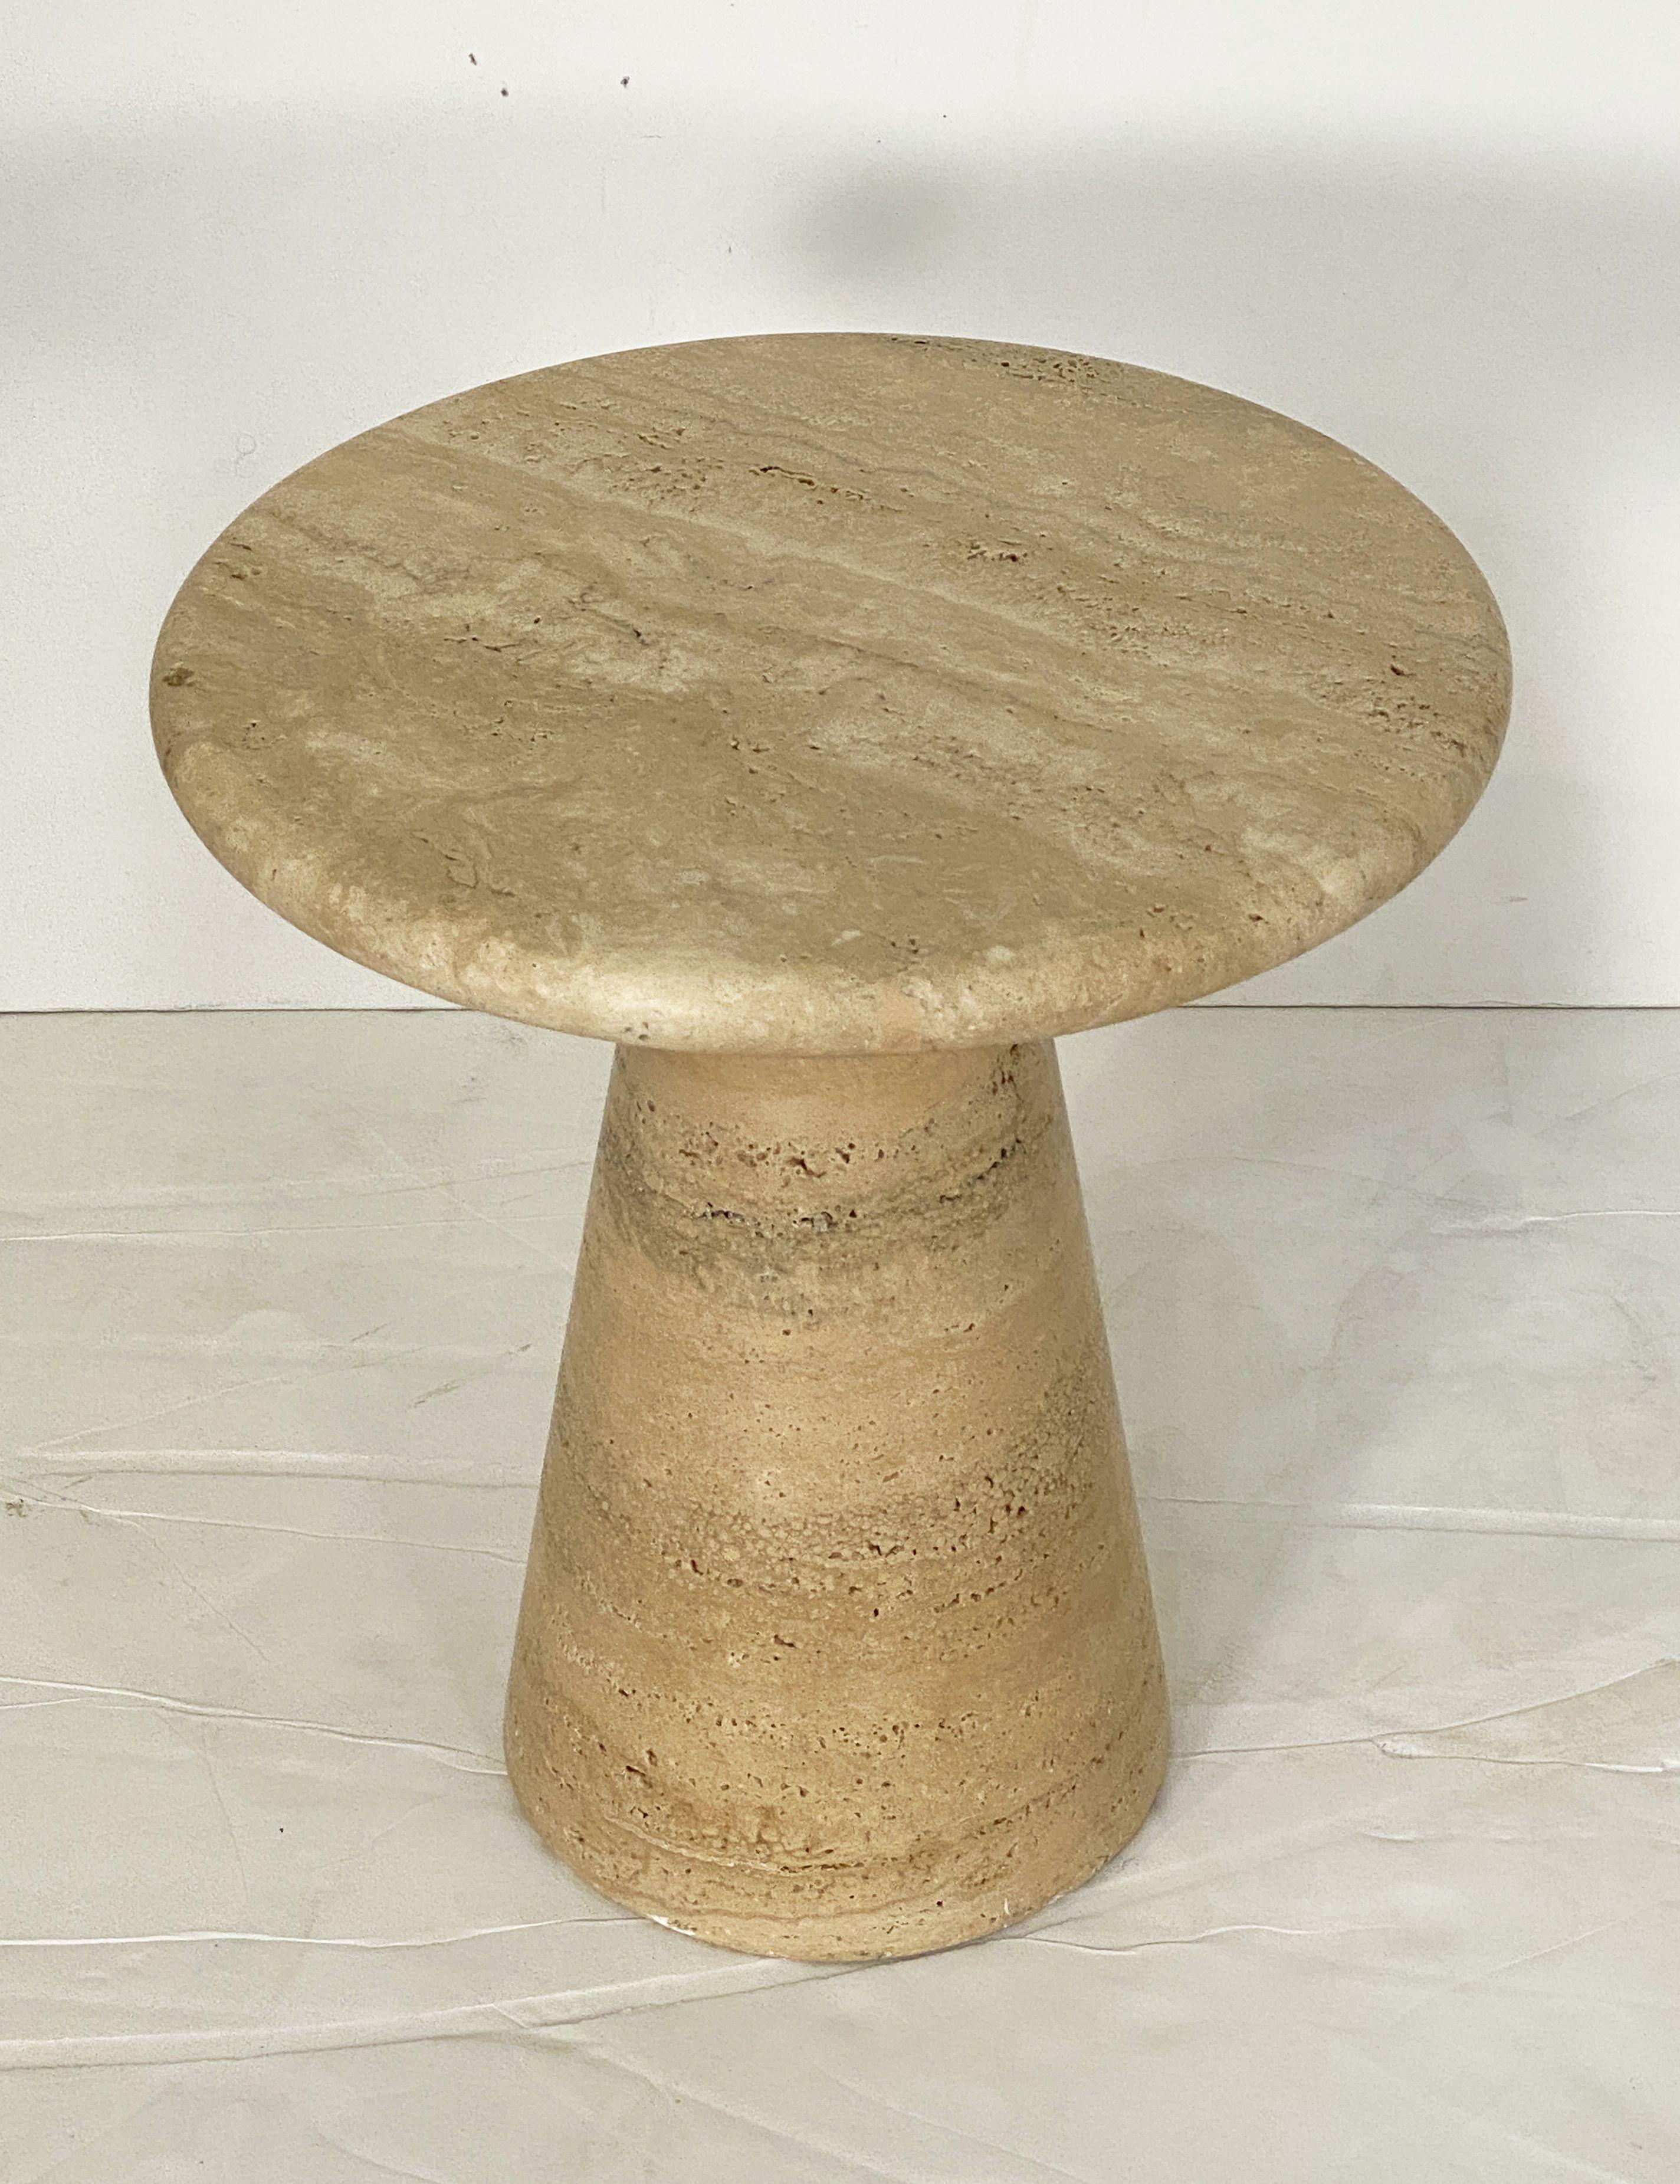 20th Century Modernist Conical Table of Travertine Stone from Italy (Four Available) For Sale